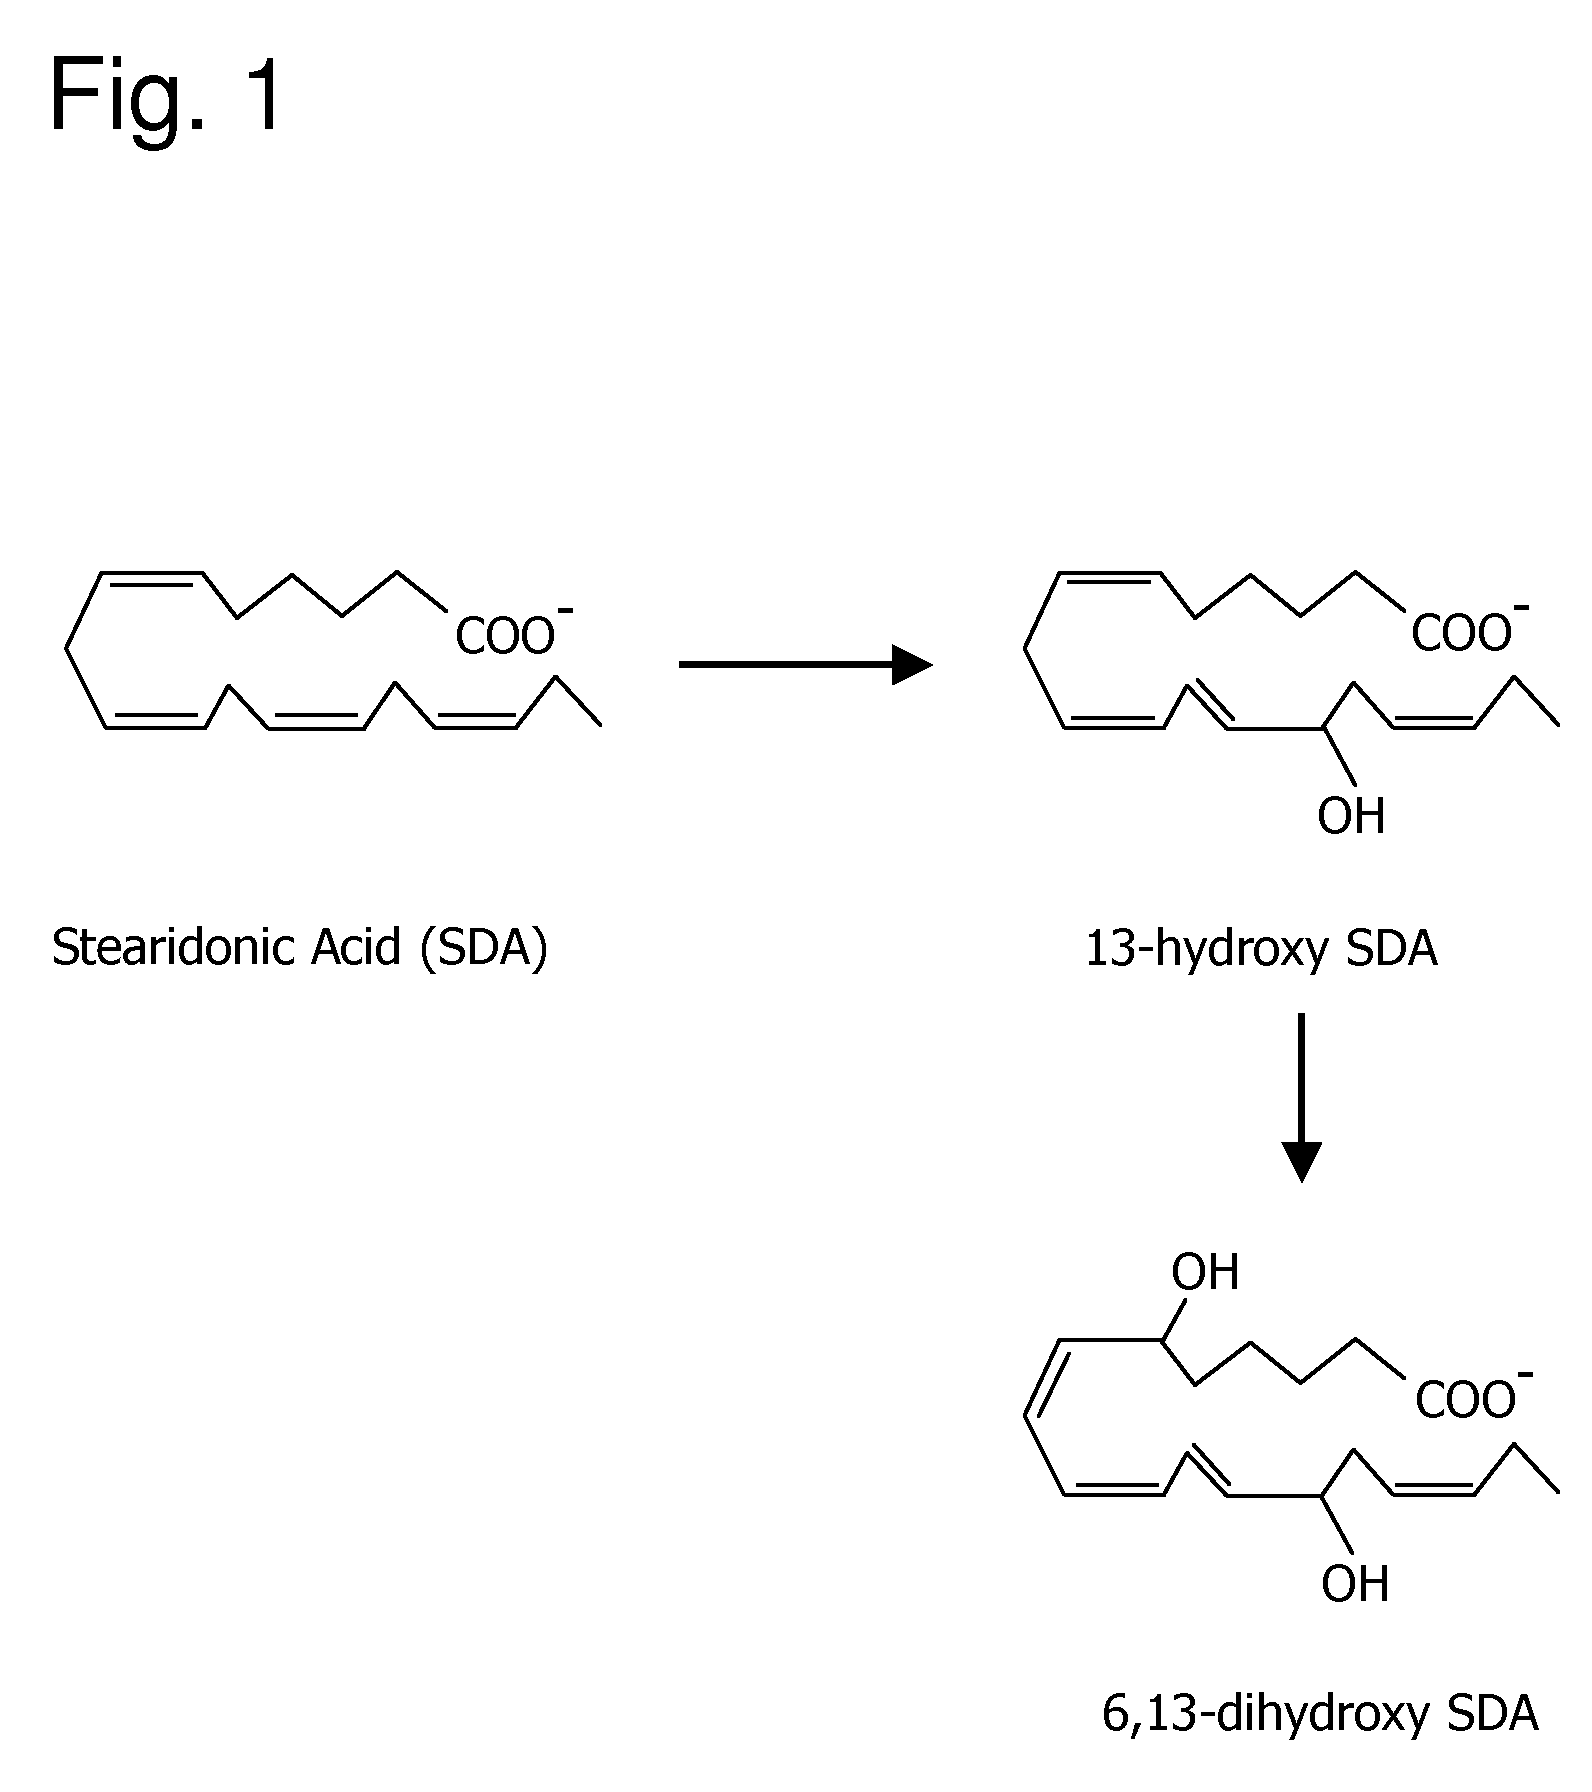 Oxylipins from stearidonic acid and .gamma.-linolenic acid and methods of making and using the same